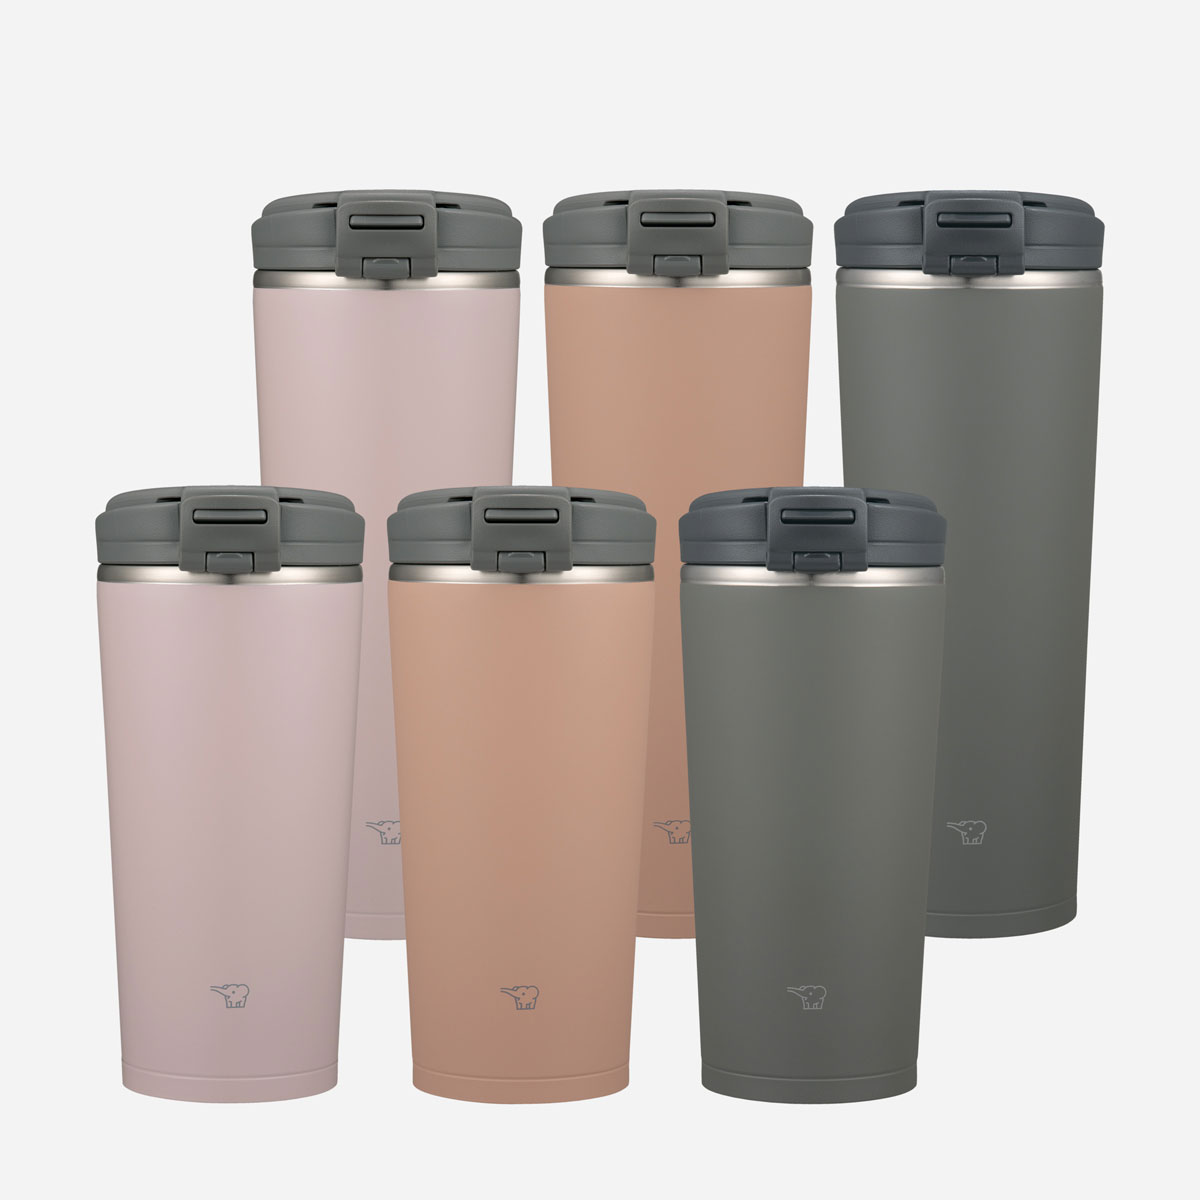 Line up of tumblers in two sizes and in pink, cinnamon, and gray colors